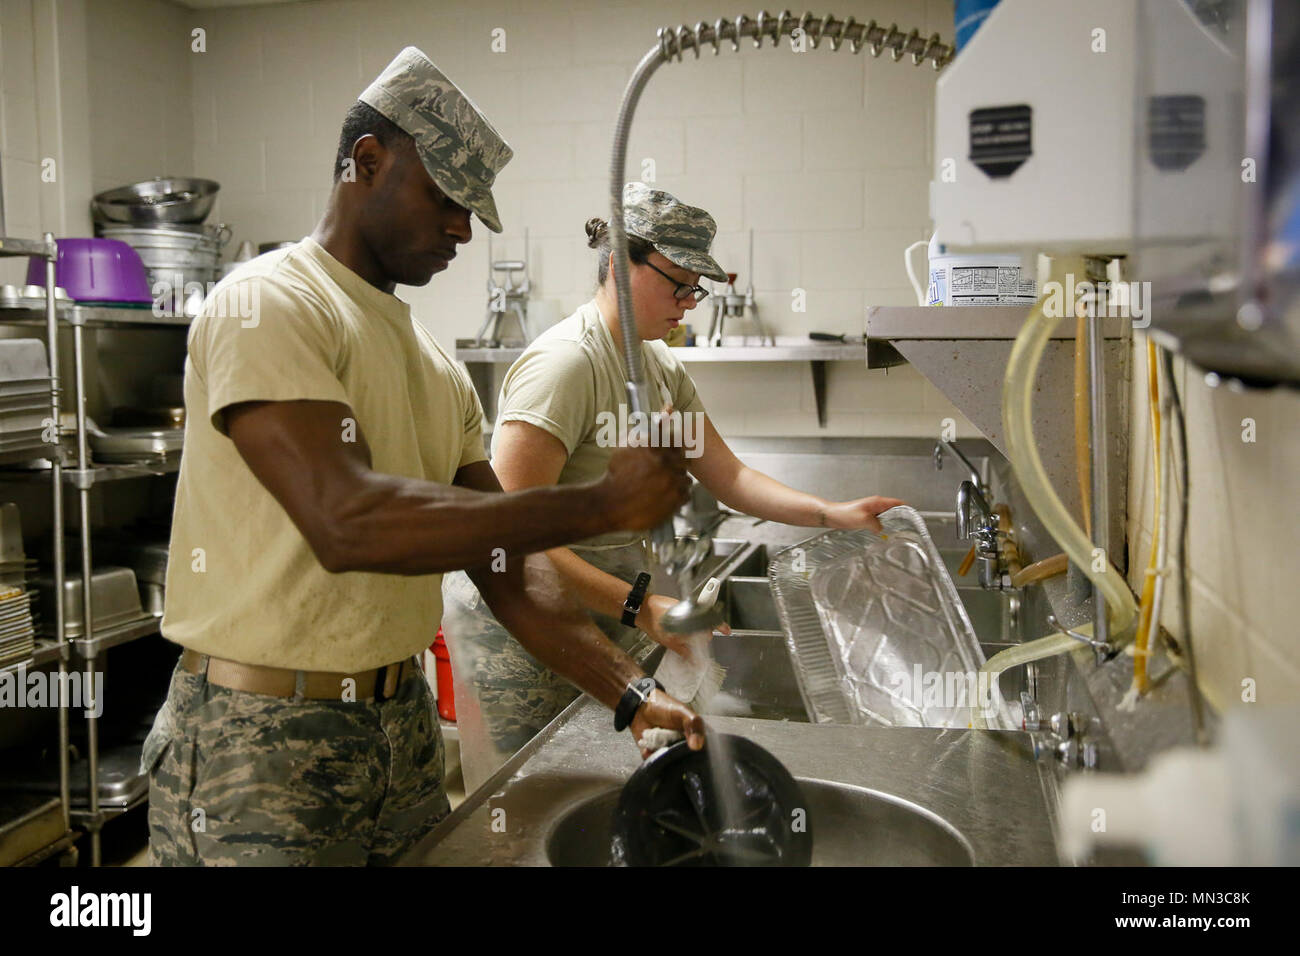 Staff Sgt. Thomas Rucker, a 147th Force Support Squadron fitness monitor, and Airman 1st Class Mandy Cantu, a 147th FSS food service specialist, wash pots and pans after lunch in the dining facility at Ellington Field Joint Reserve Base, Texas, Sept. 3, 2017. Members of the FSS at Ellington Field have been working more than ten hours each day, and seven days a week at the dining facility to provide meals to service members. (Air National Guard photos by Staff Sgt. Daniel J. Martinez) Stock Photo